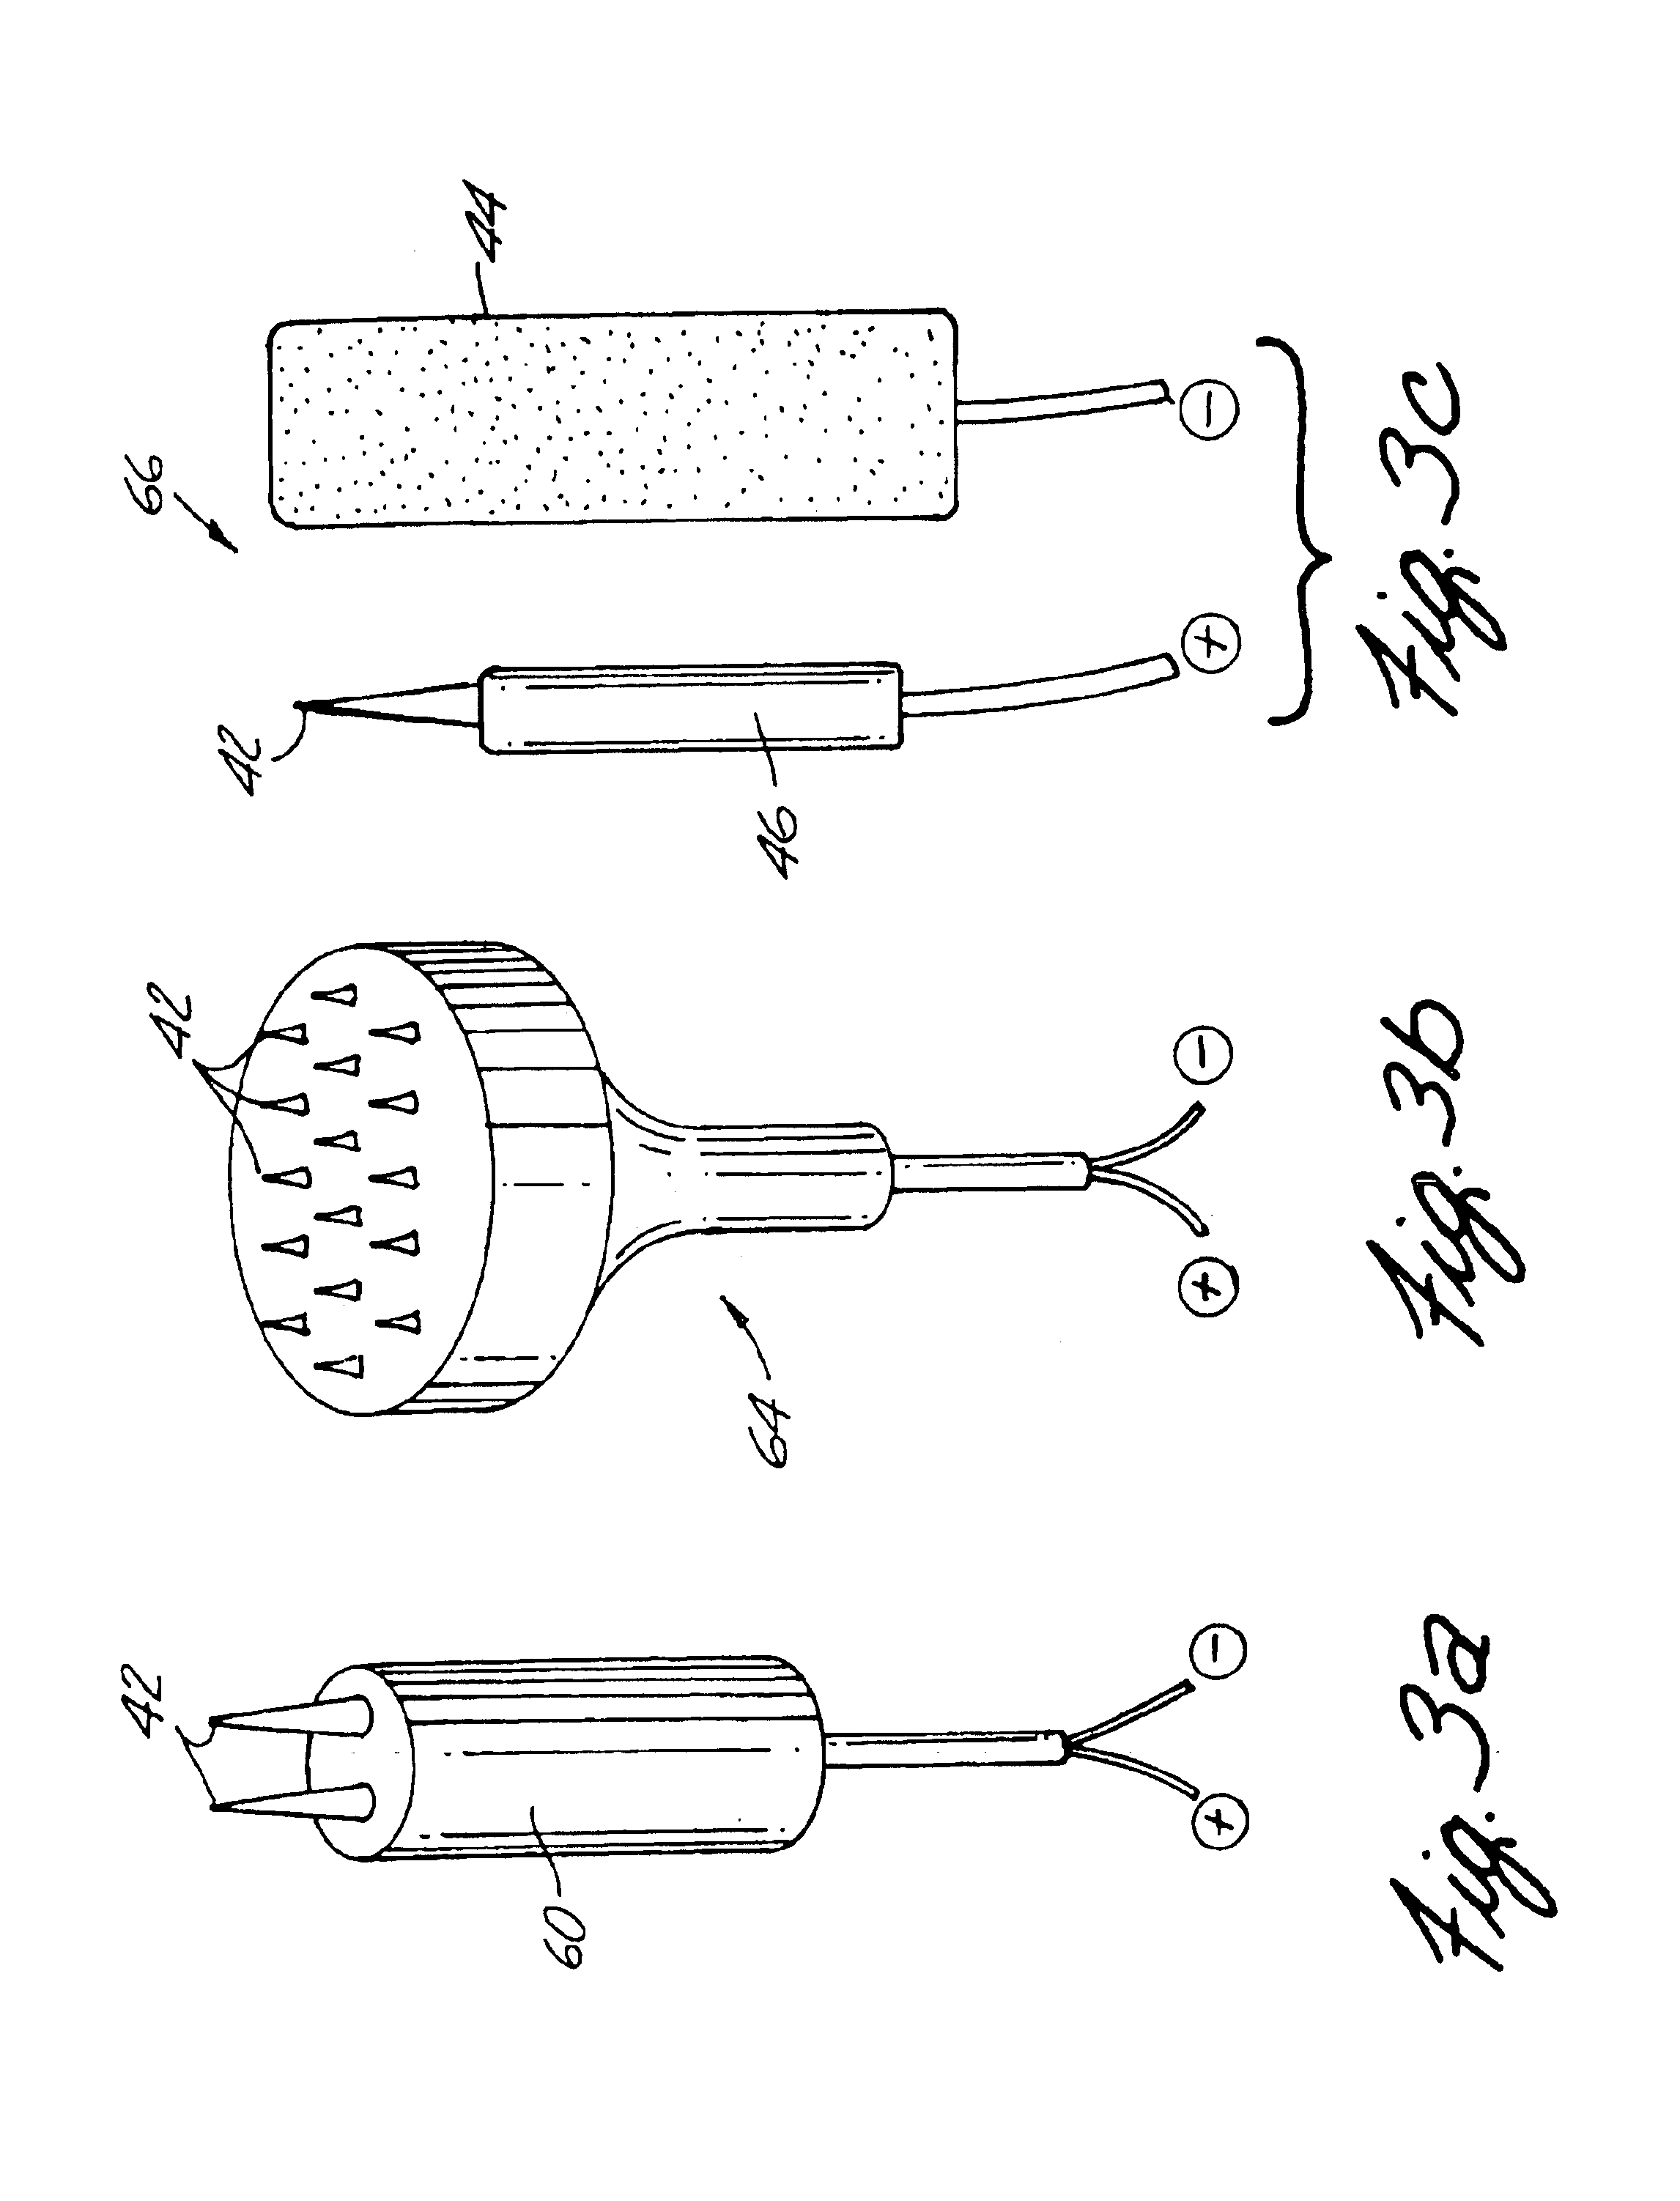 Apparatus and method for reducing subcutaneous fat deposits, virtual face lift and body sculpturing by electroporation